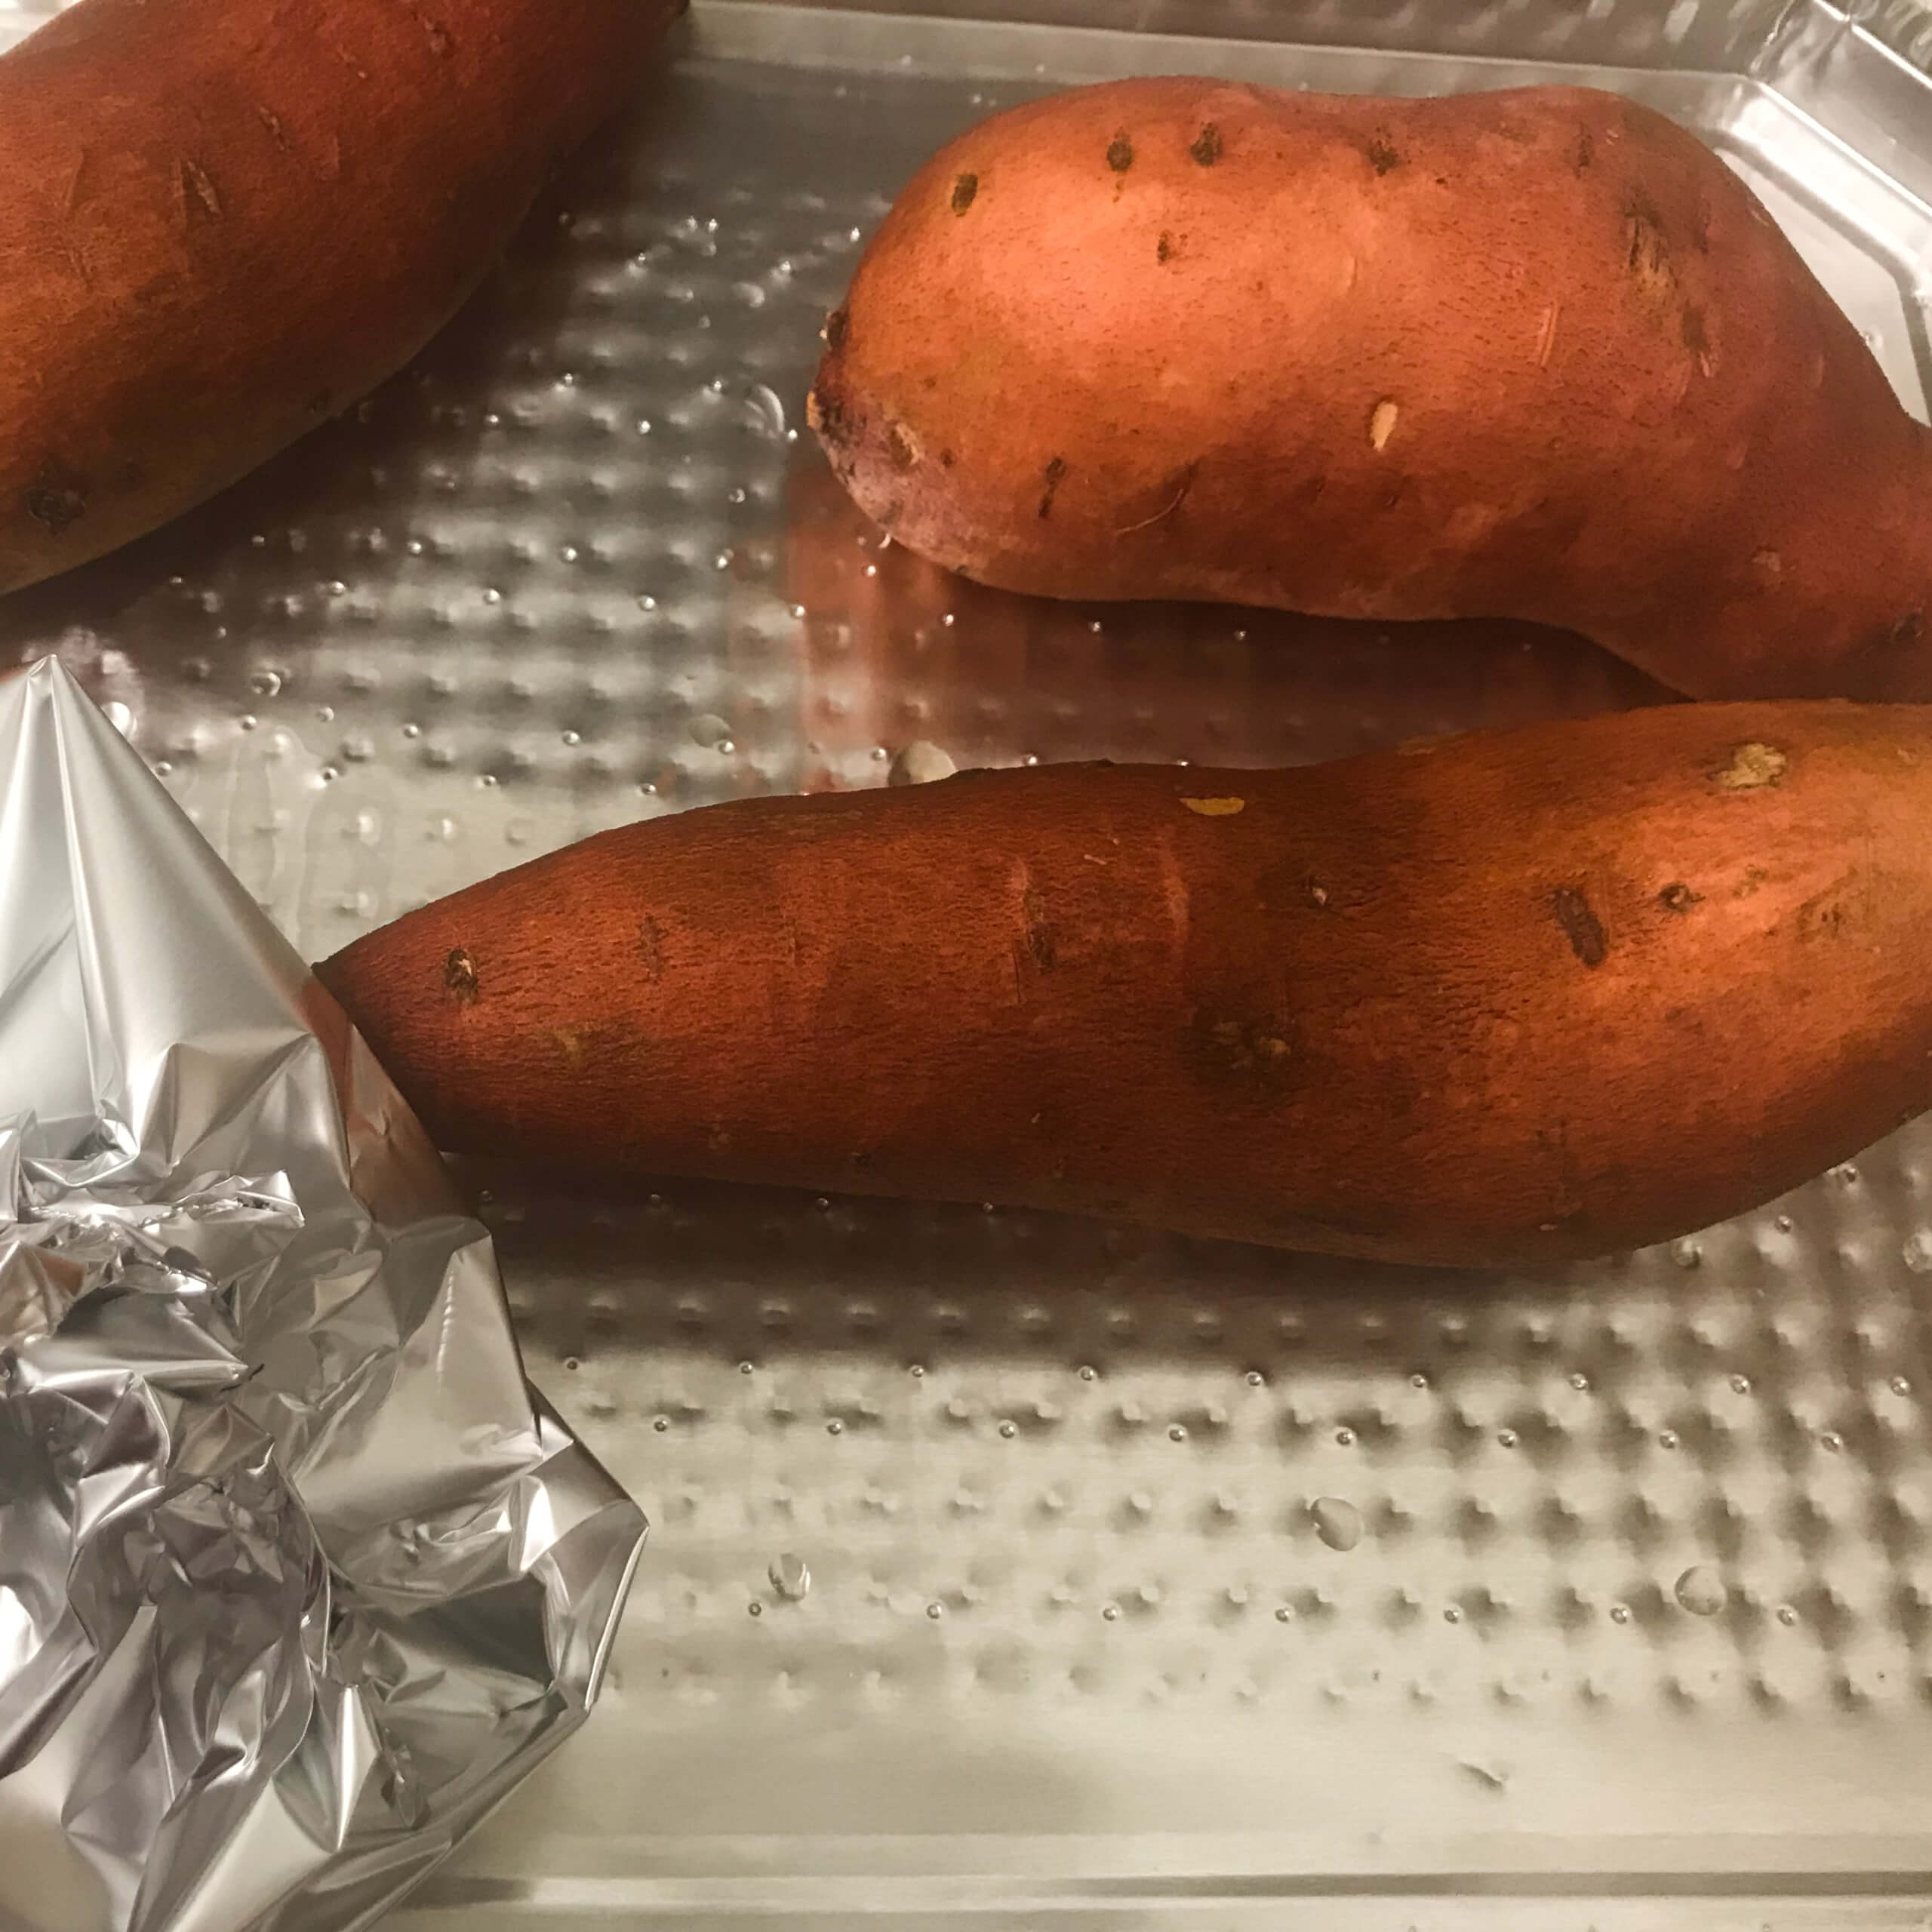 sweet potatoes and wrapped garlic on baking tray